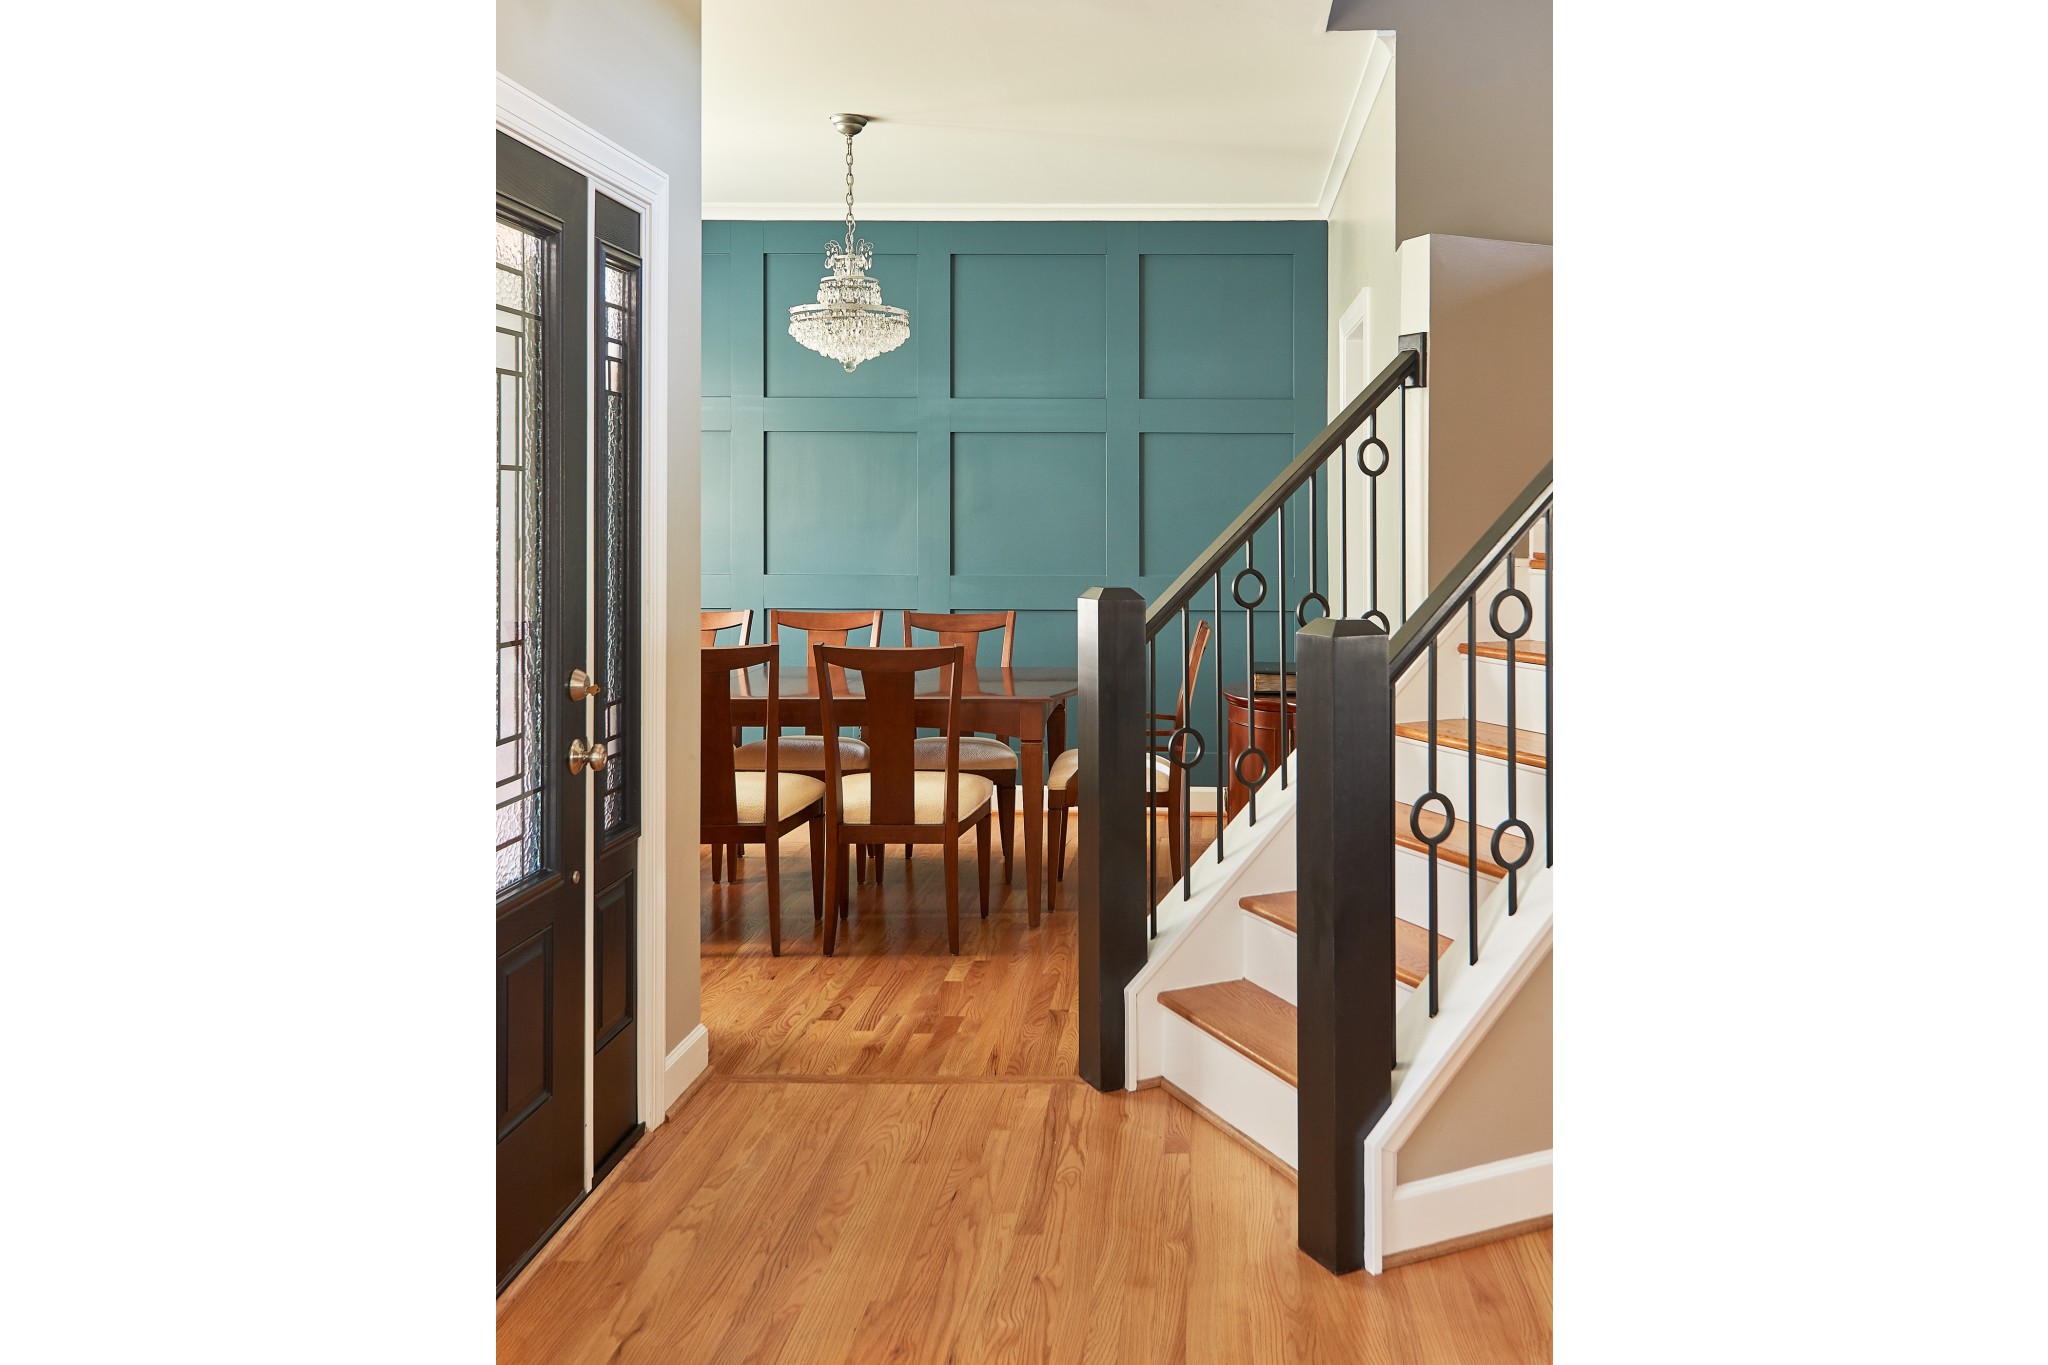 entry way remodel turquoise feature wall in dining room light color stairs hardwood floors